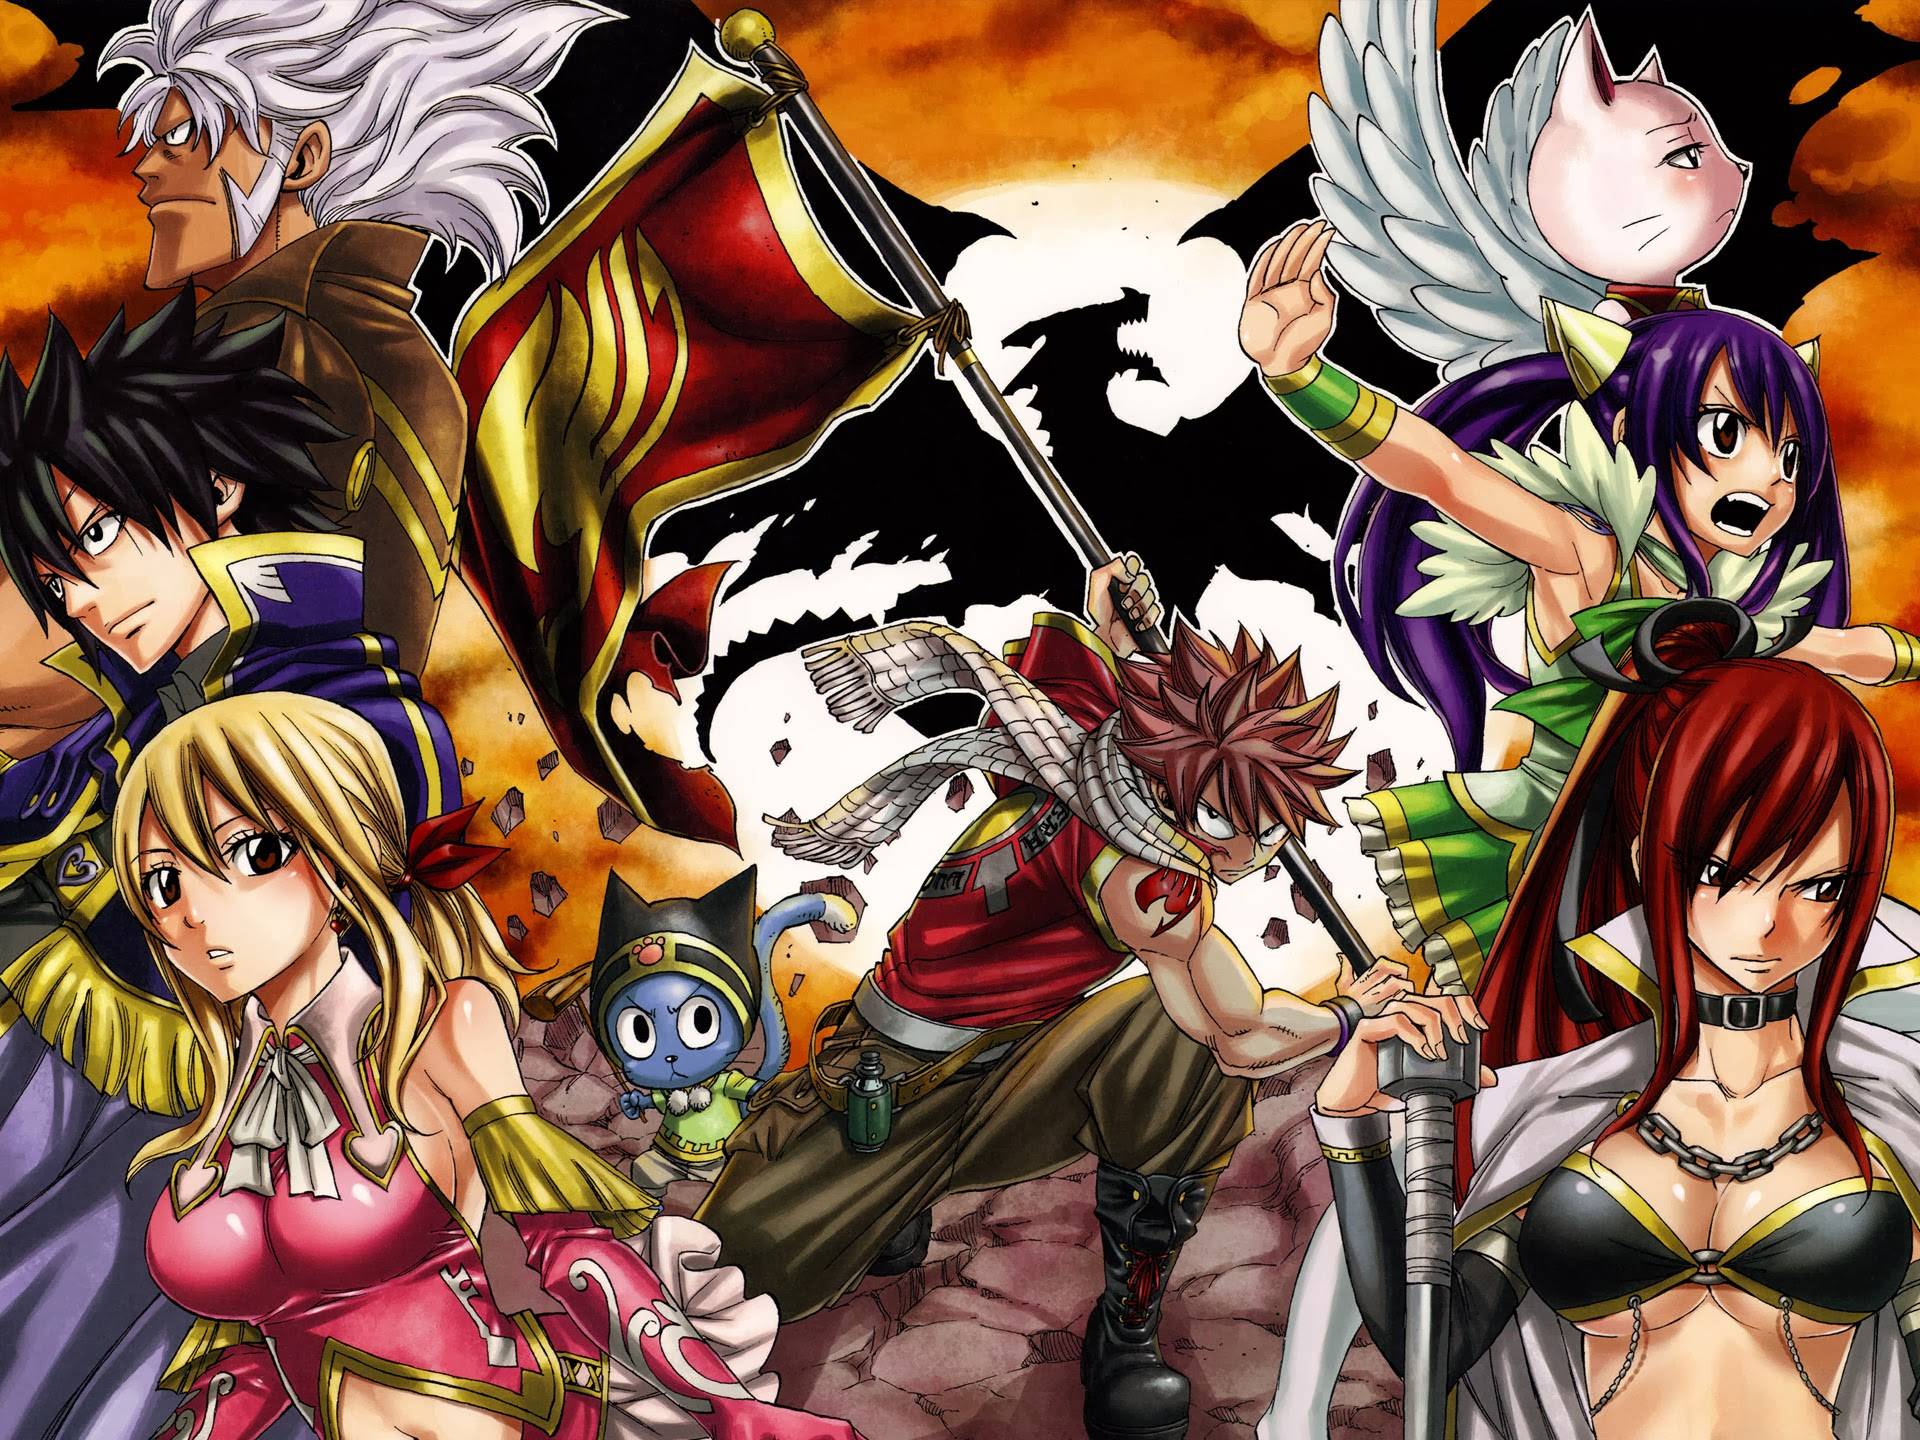 Fairy Tail Wallpaper Android (Picture)